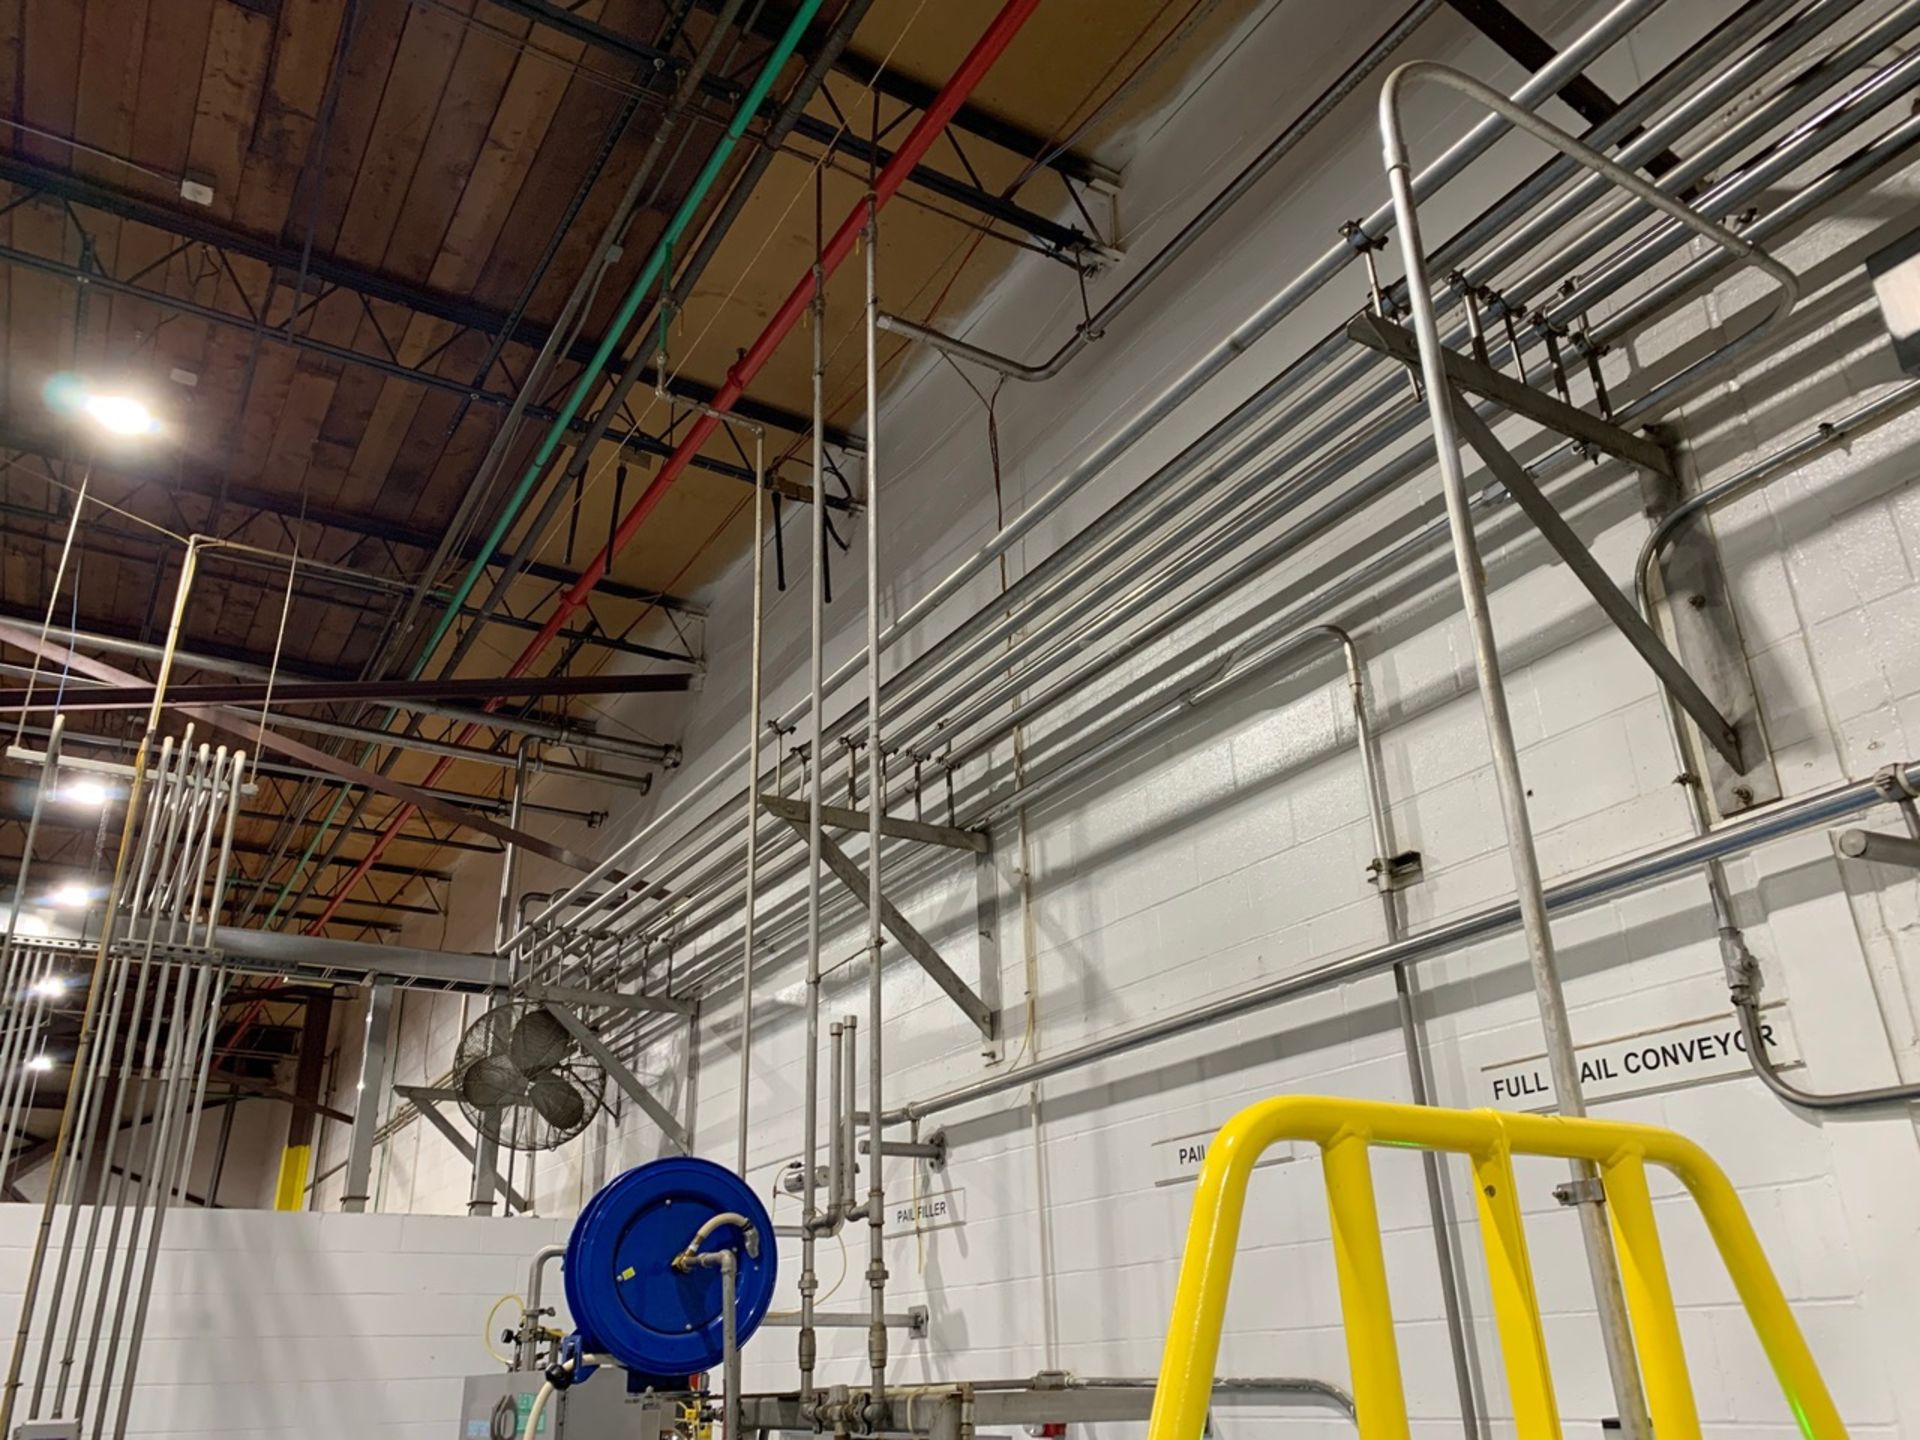 Lot of Stainless Steel Piping in Ceiling - 2 Inch - Image 6 of 6